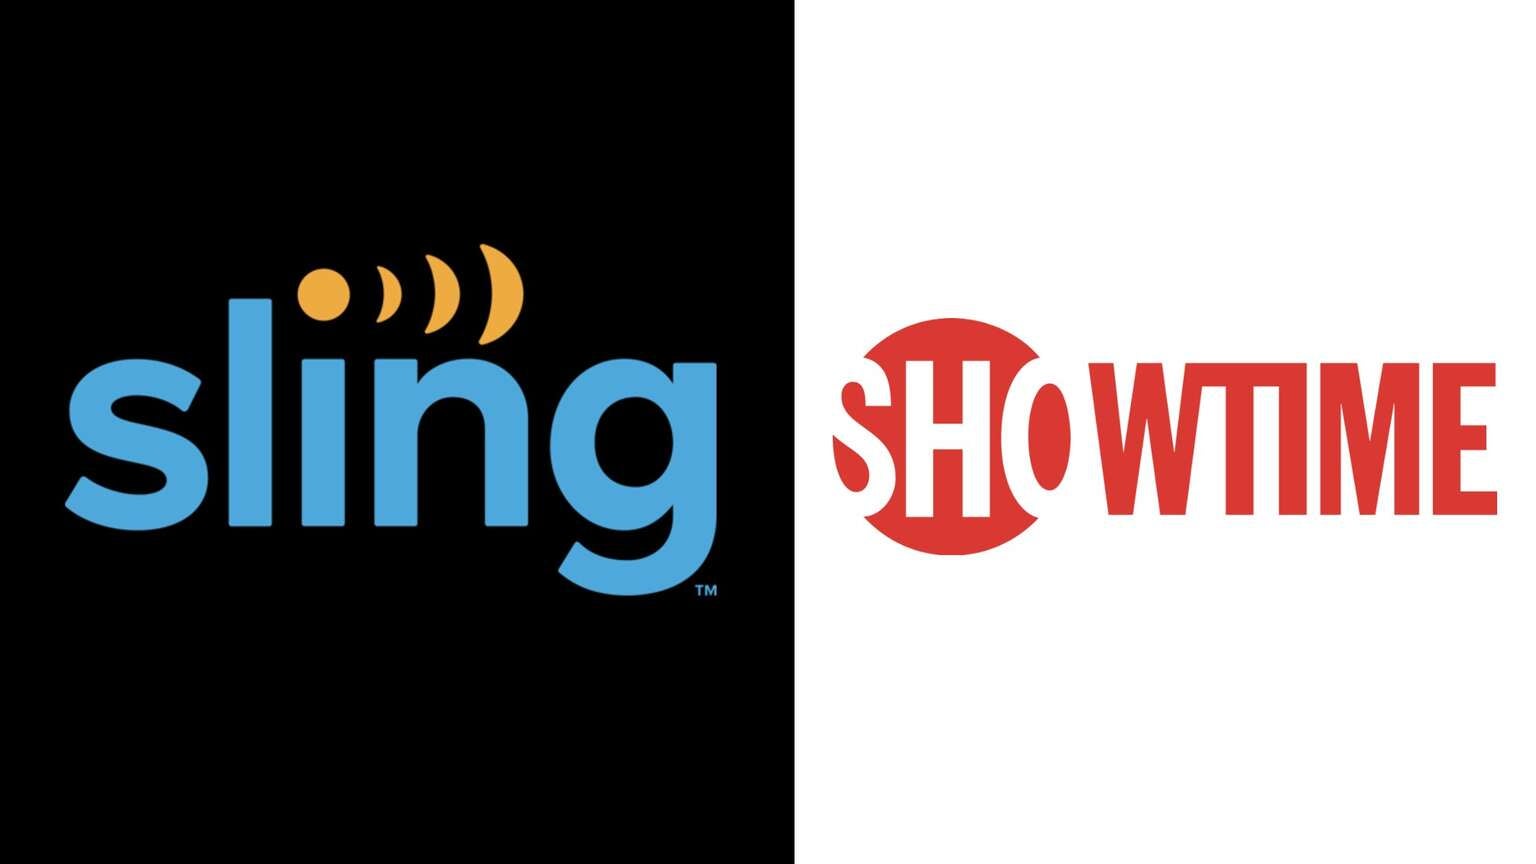 DEAL ALERT Sling TV Offering Free Preview of Showtime Just in Time for